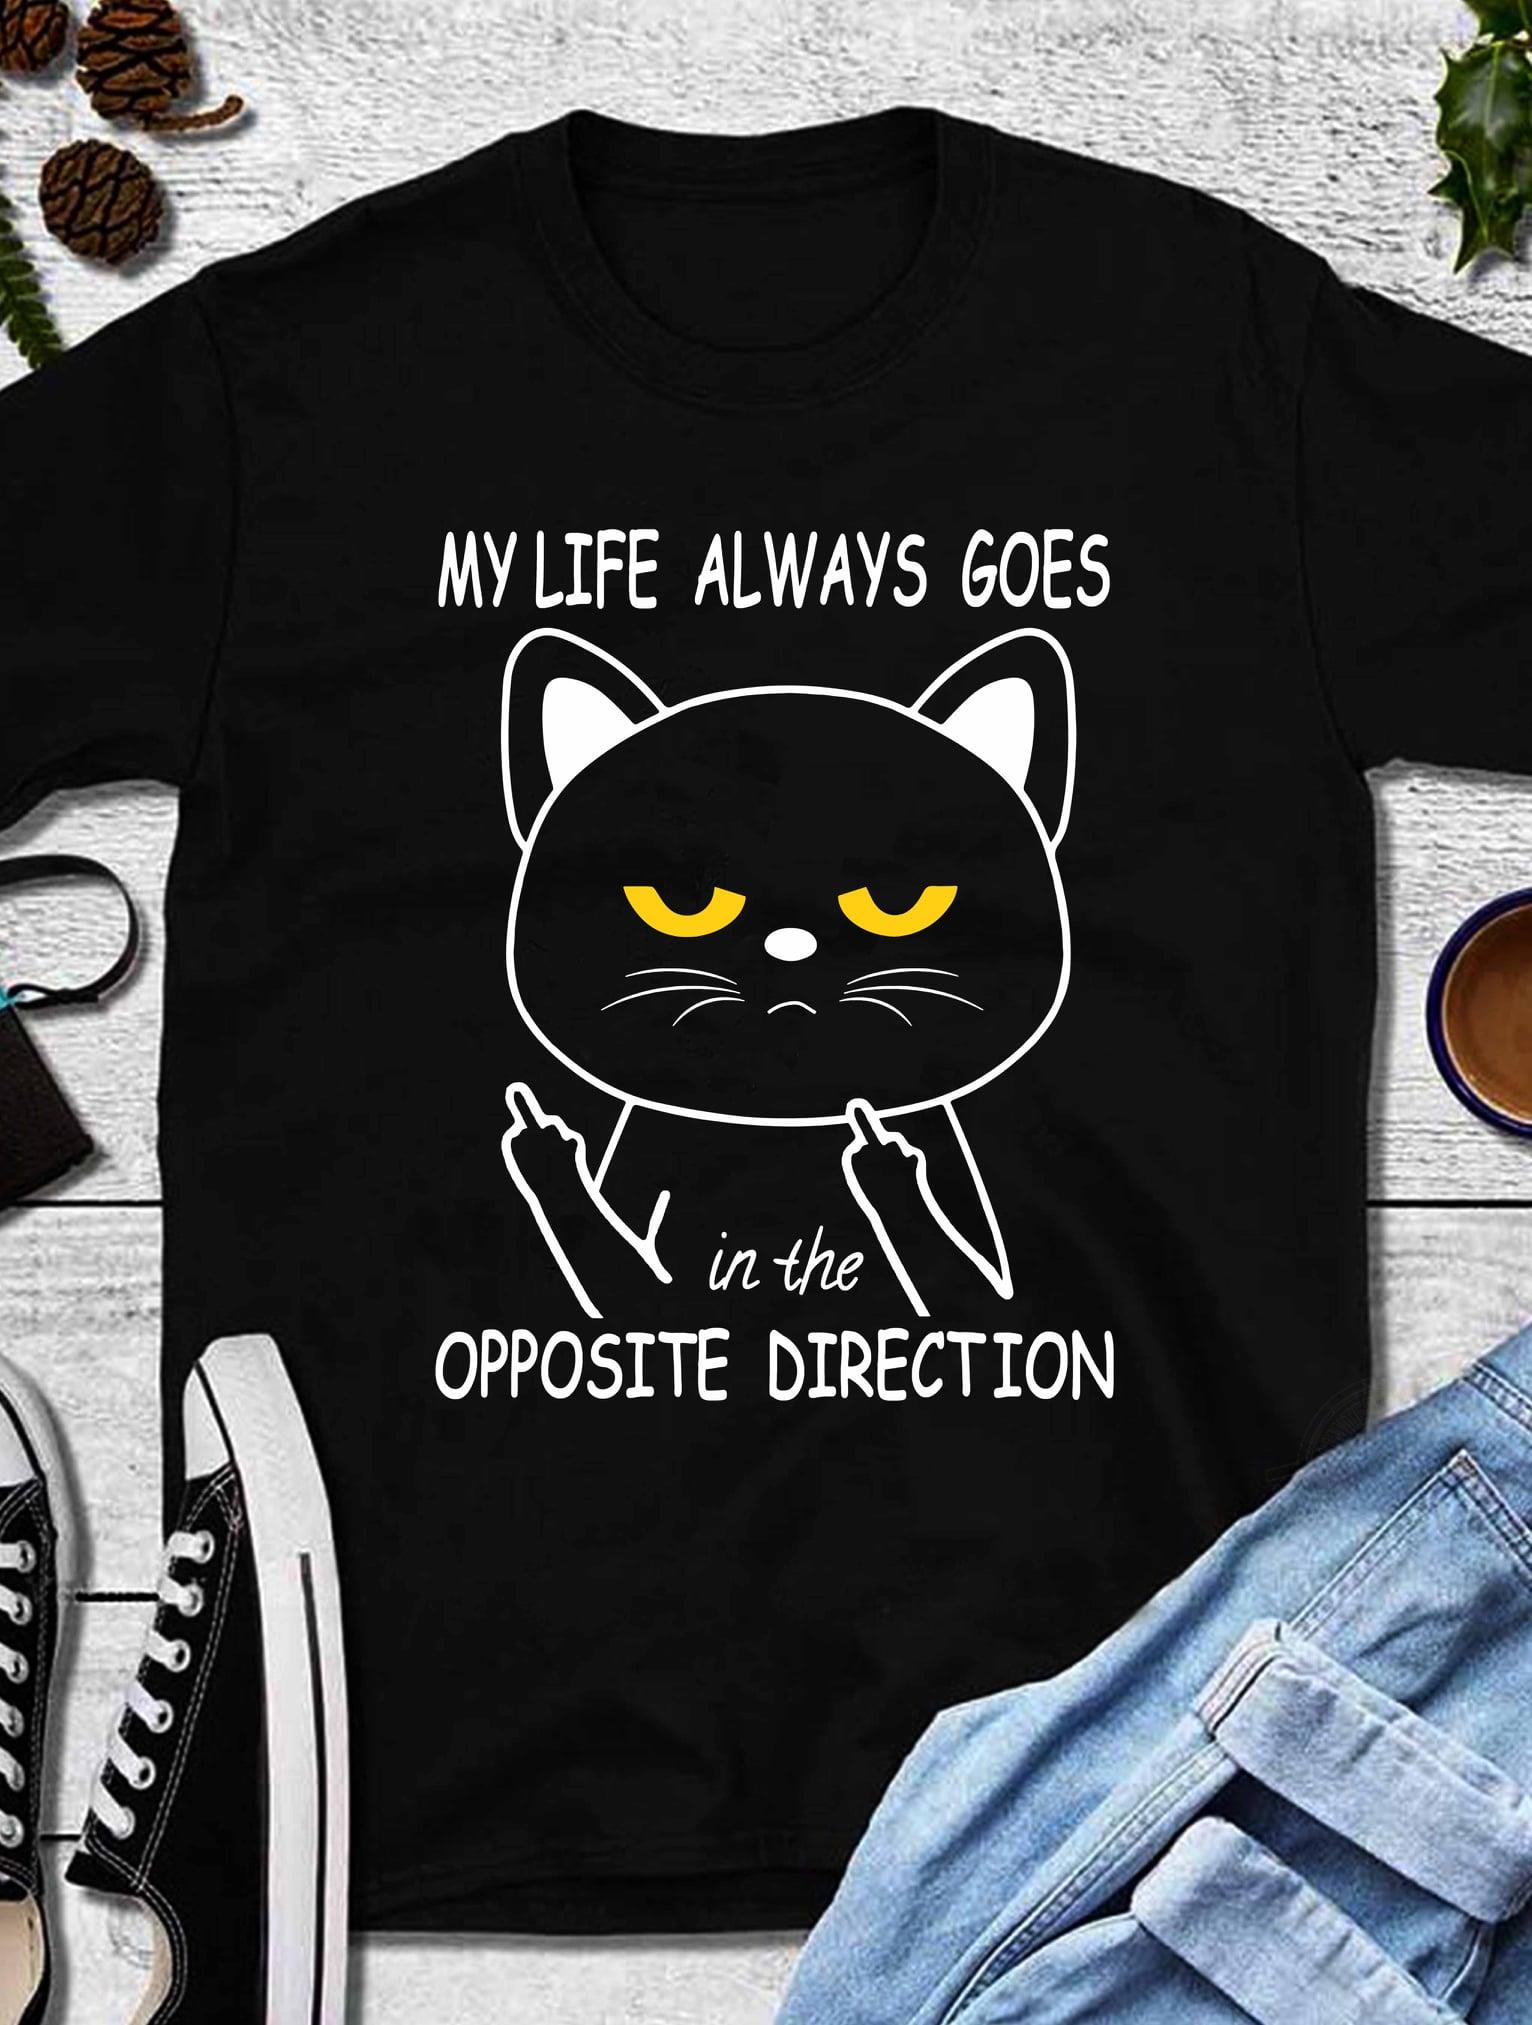 My Life Always Goes In The Opposite Direction Shirt